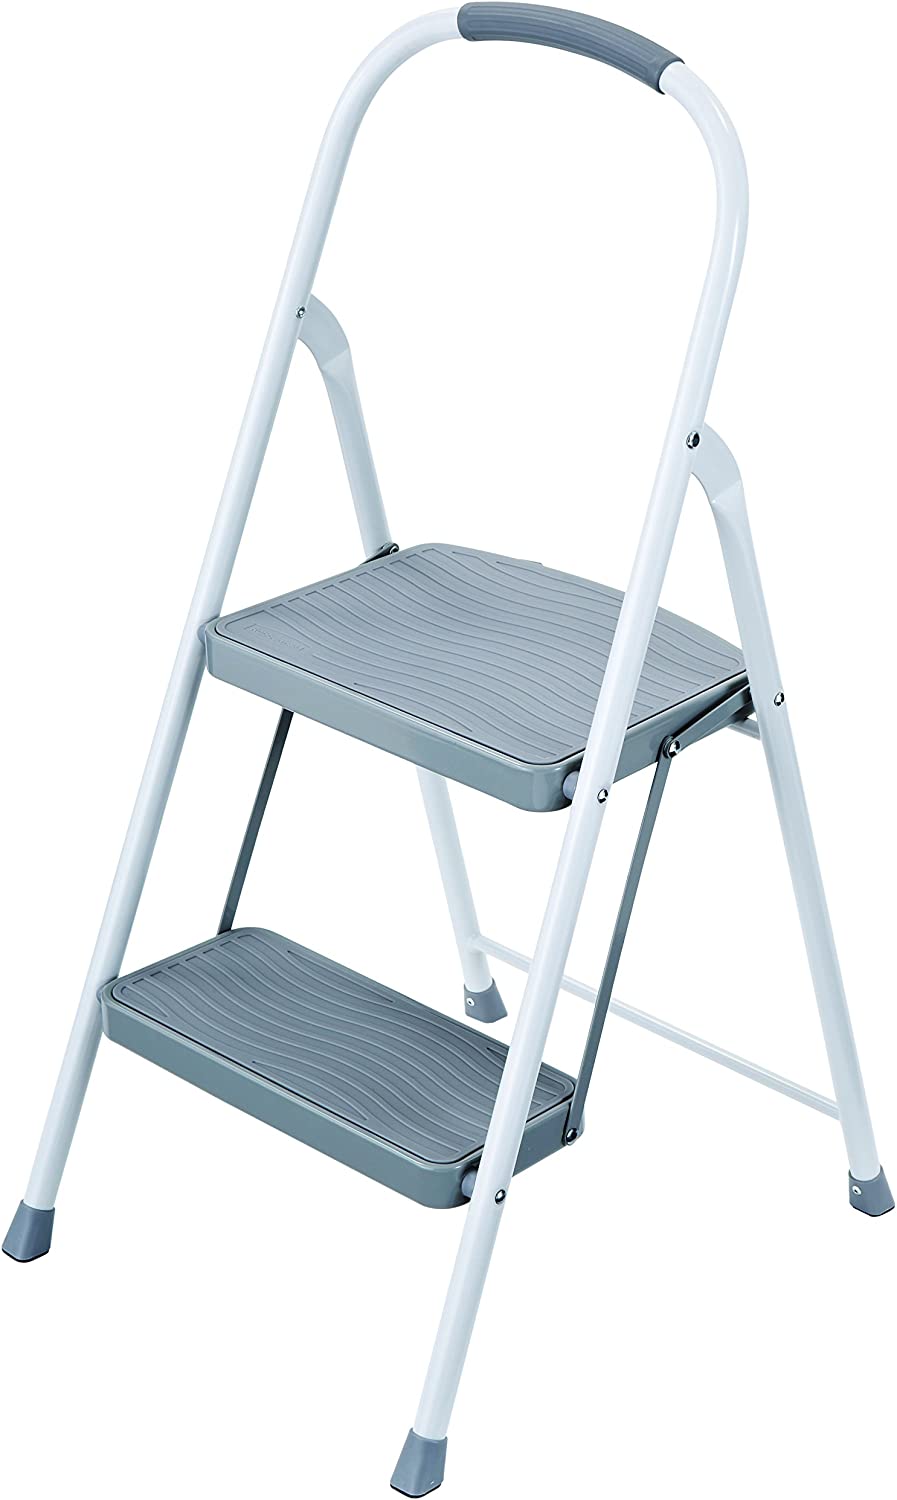 Rubbermaid RMS-2 Compact Steel Step Ladder, 2-Step